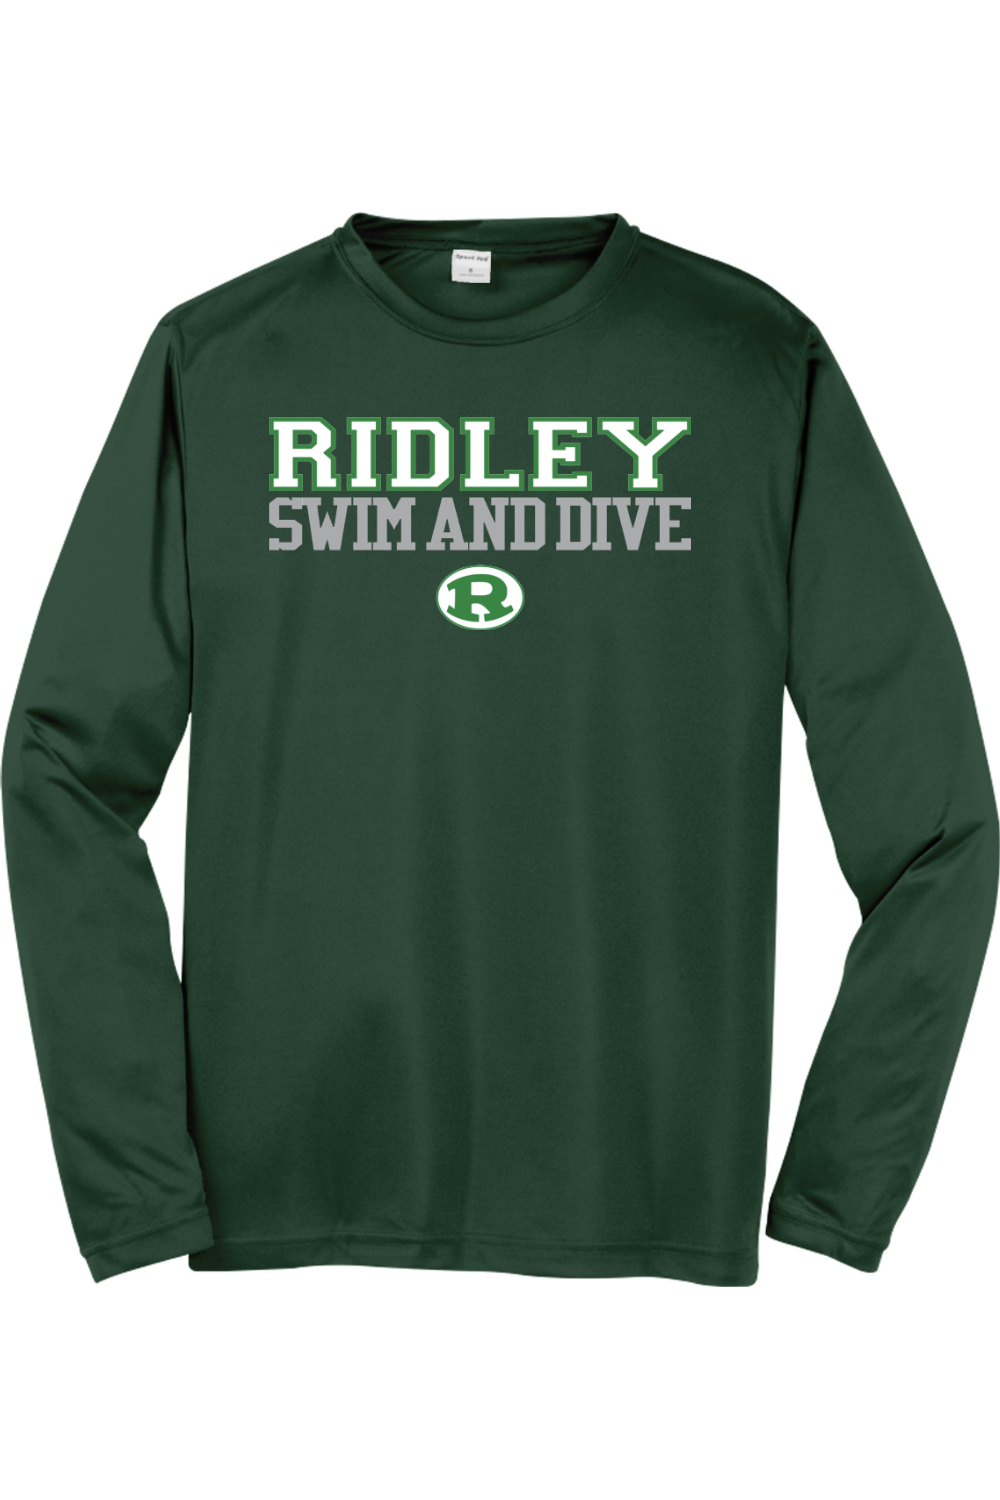 Ridley Swim and Dive Sport-Tek Long Sleeve PosiCharge Competitor Tee